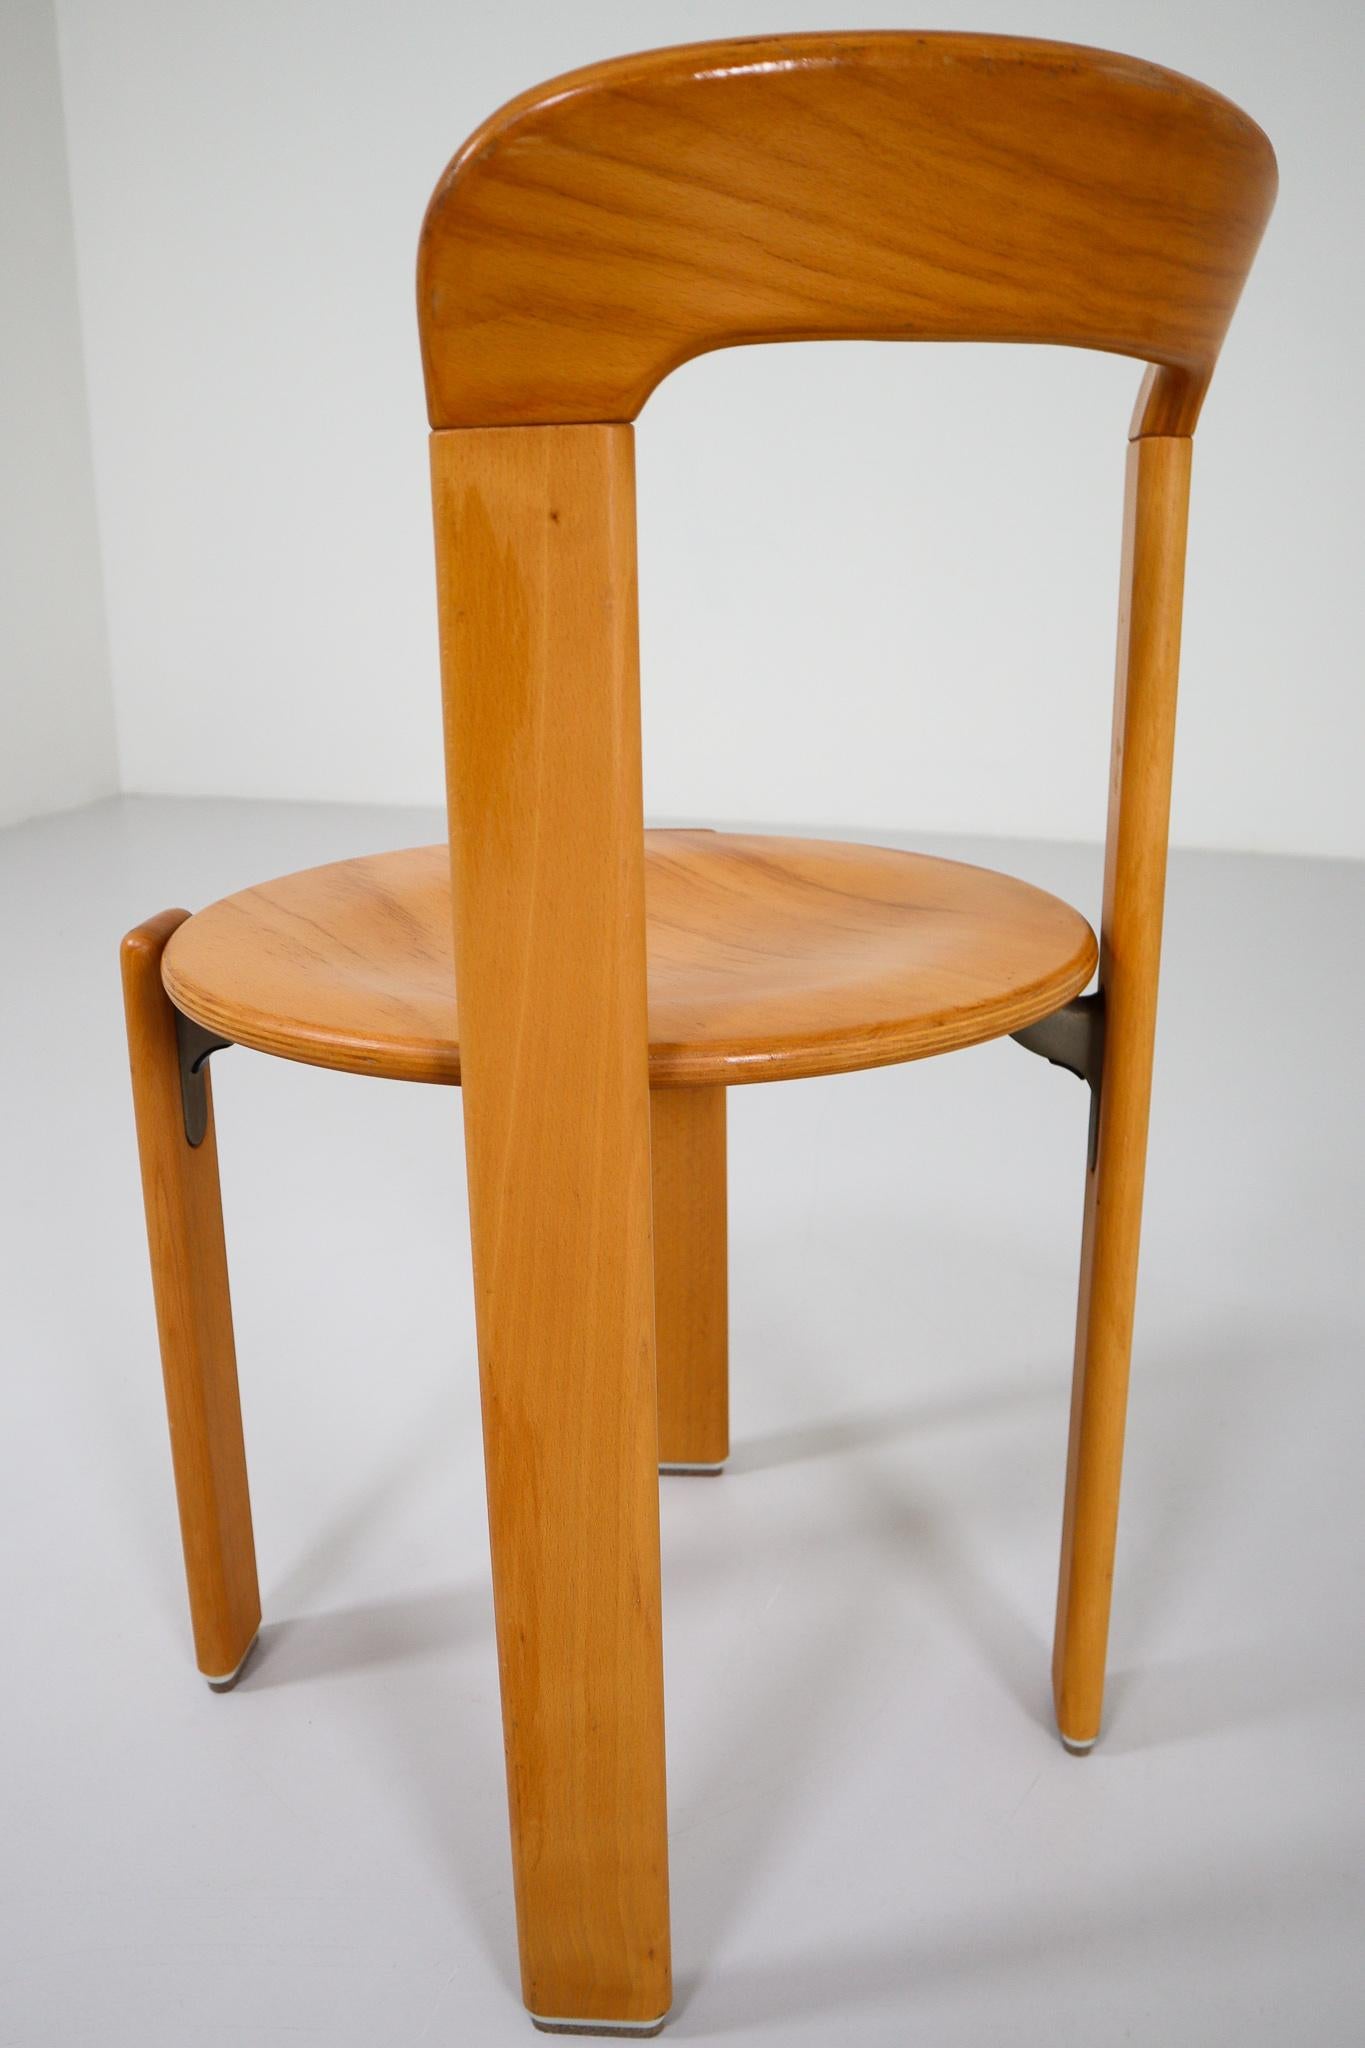 Large set dining room chairs were designed by Bruno Rey for Kusch and Co., 1970s. The dining room chairs were made of solid beech, laminated plywood beech and cast aluminum, characteristic steel brackets support wooden round seat. These chairs are